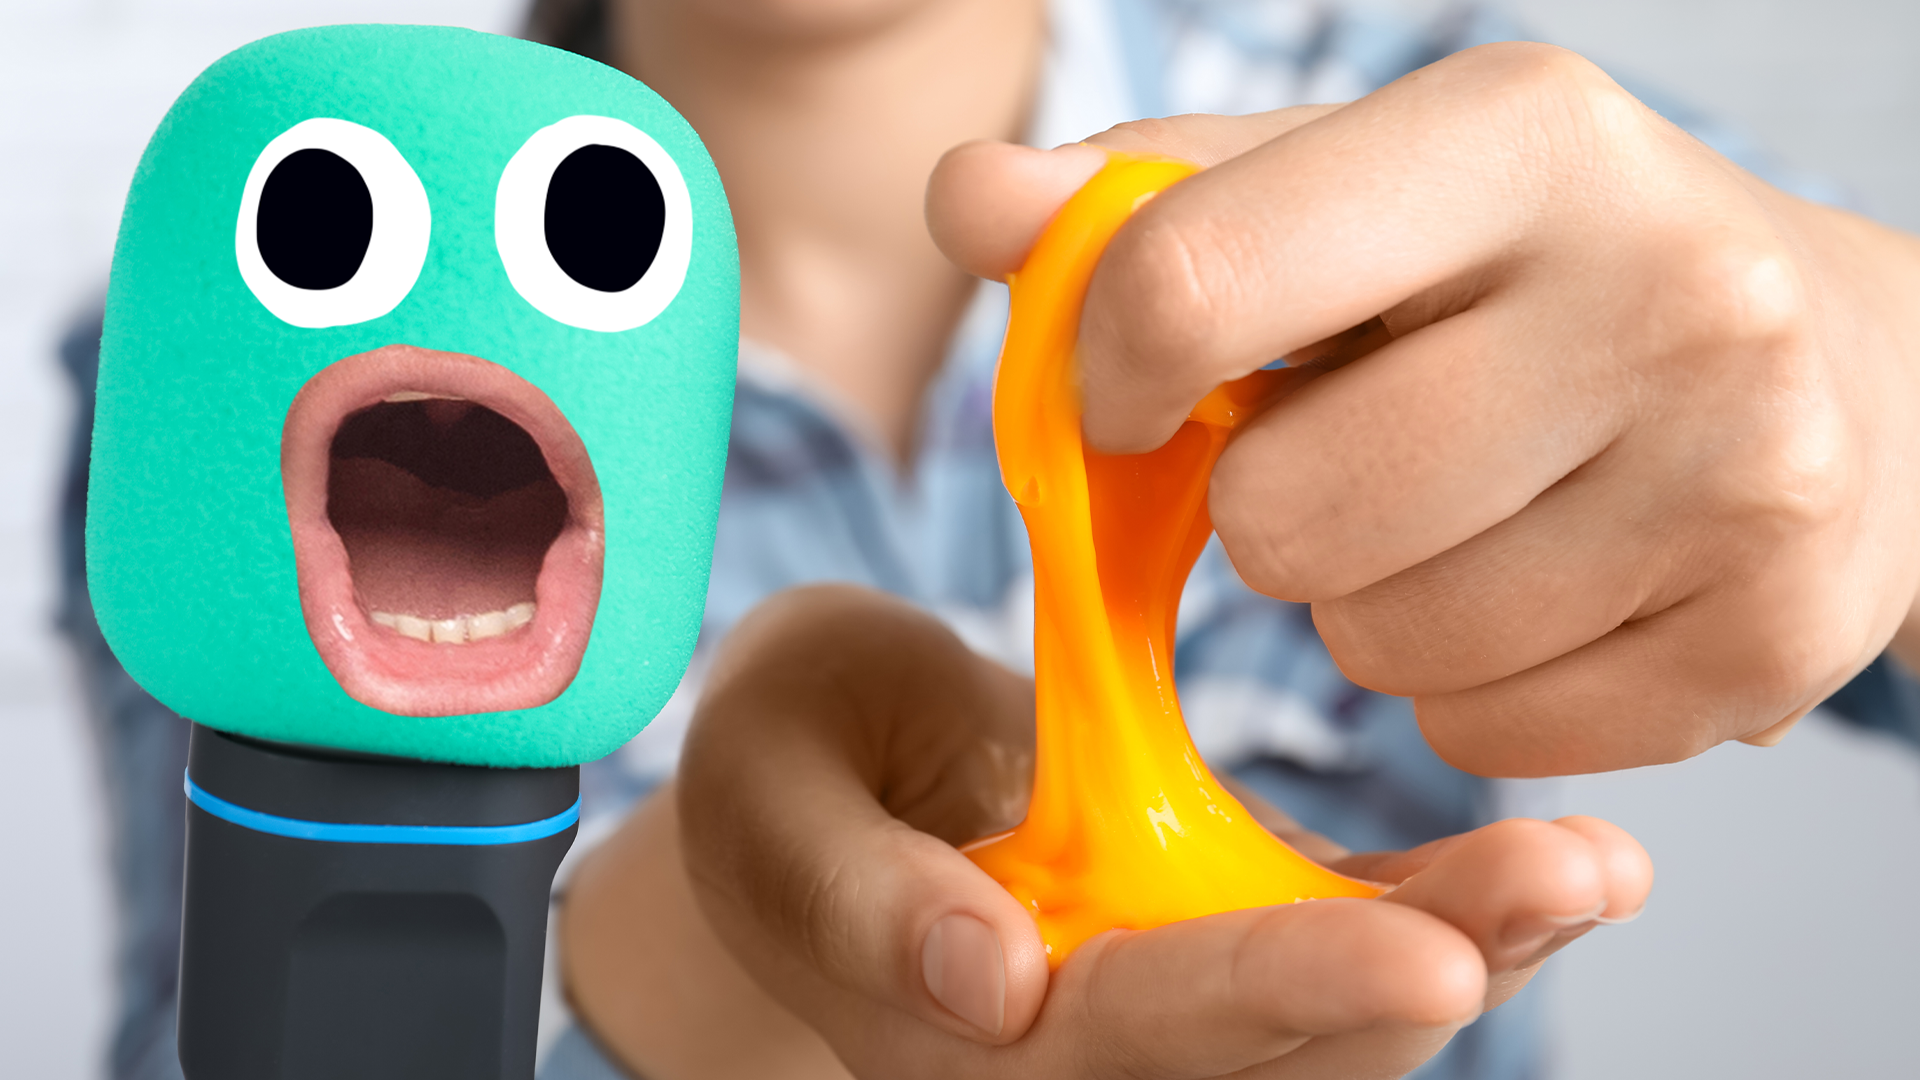 Shocked microphone with someone holding slime next to it